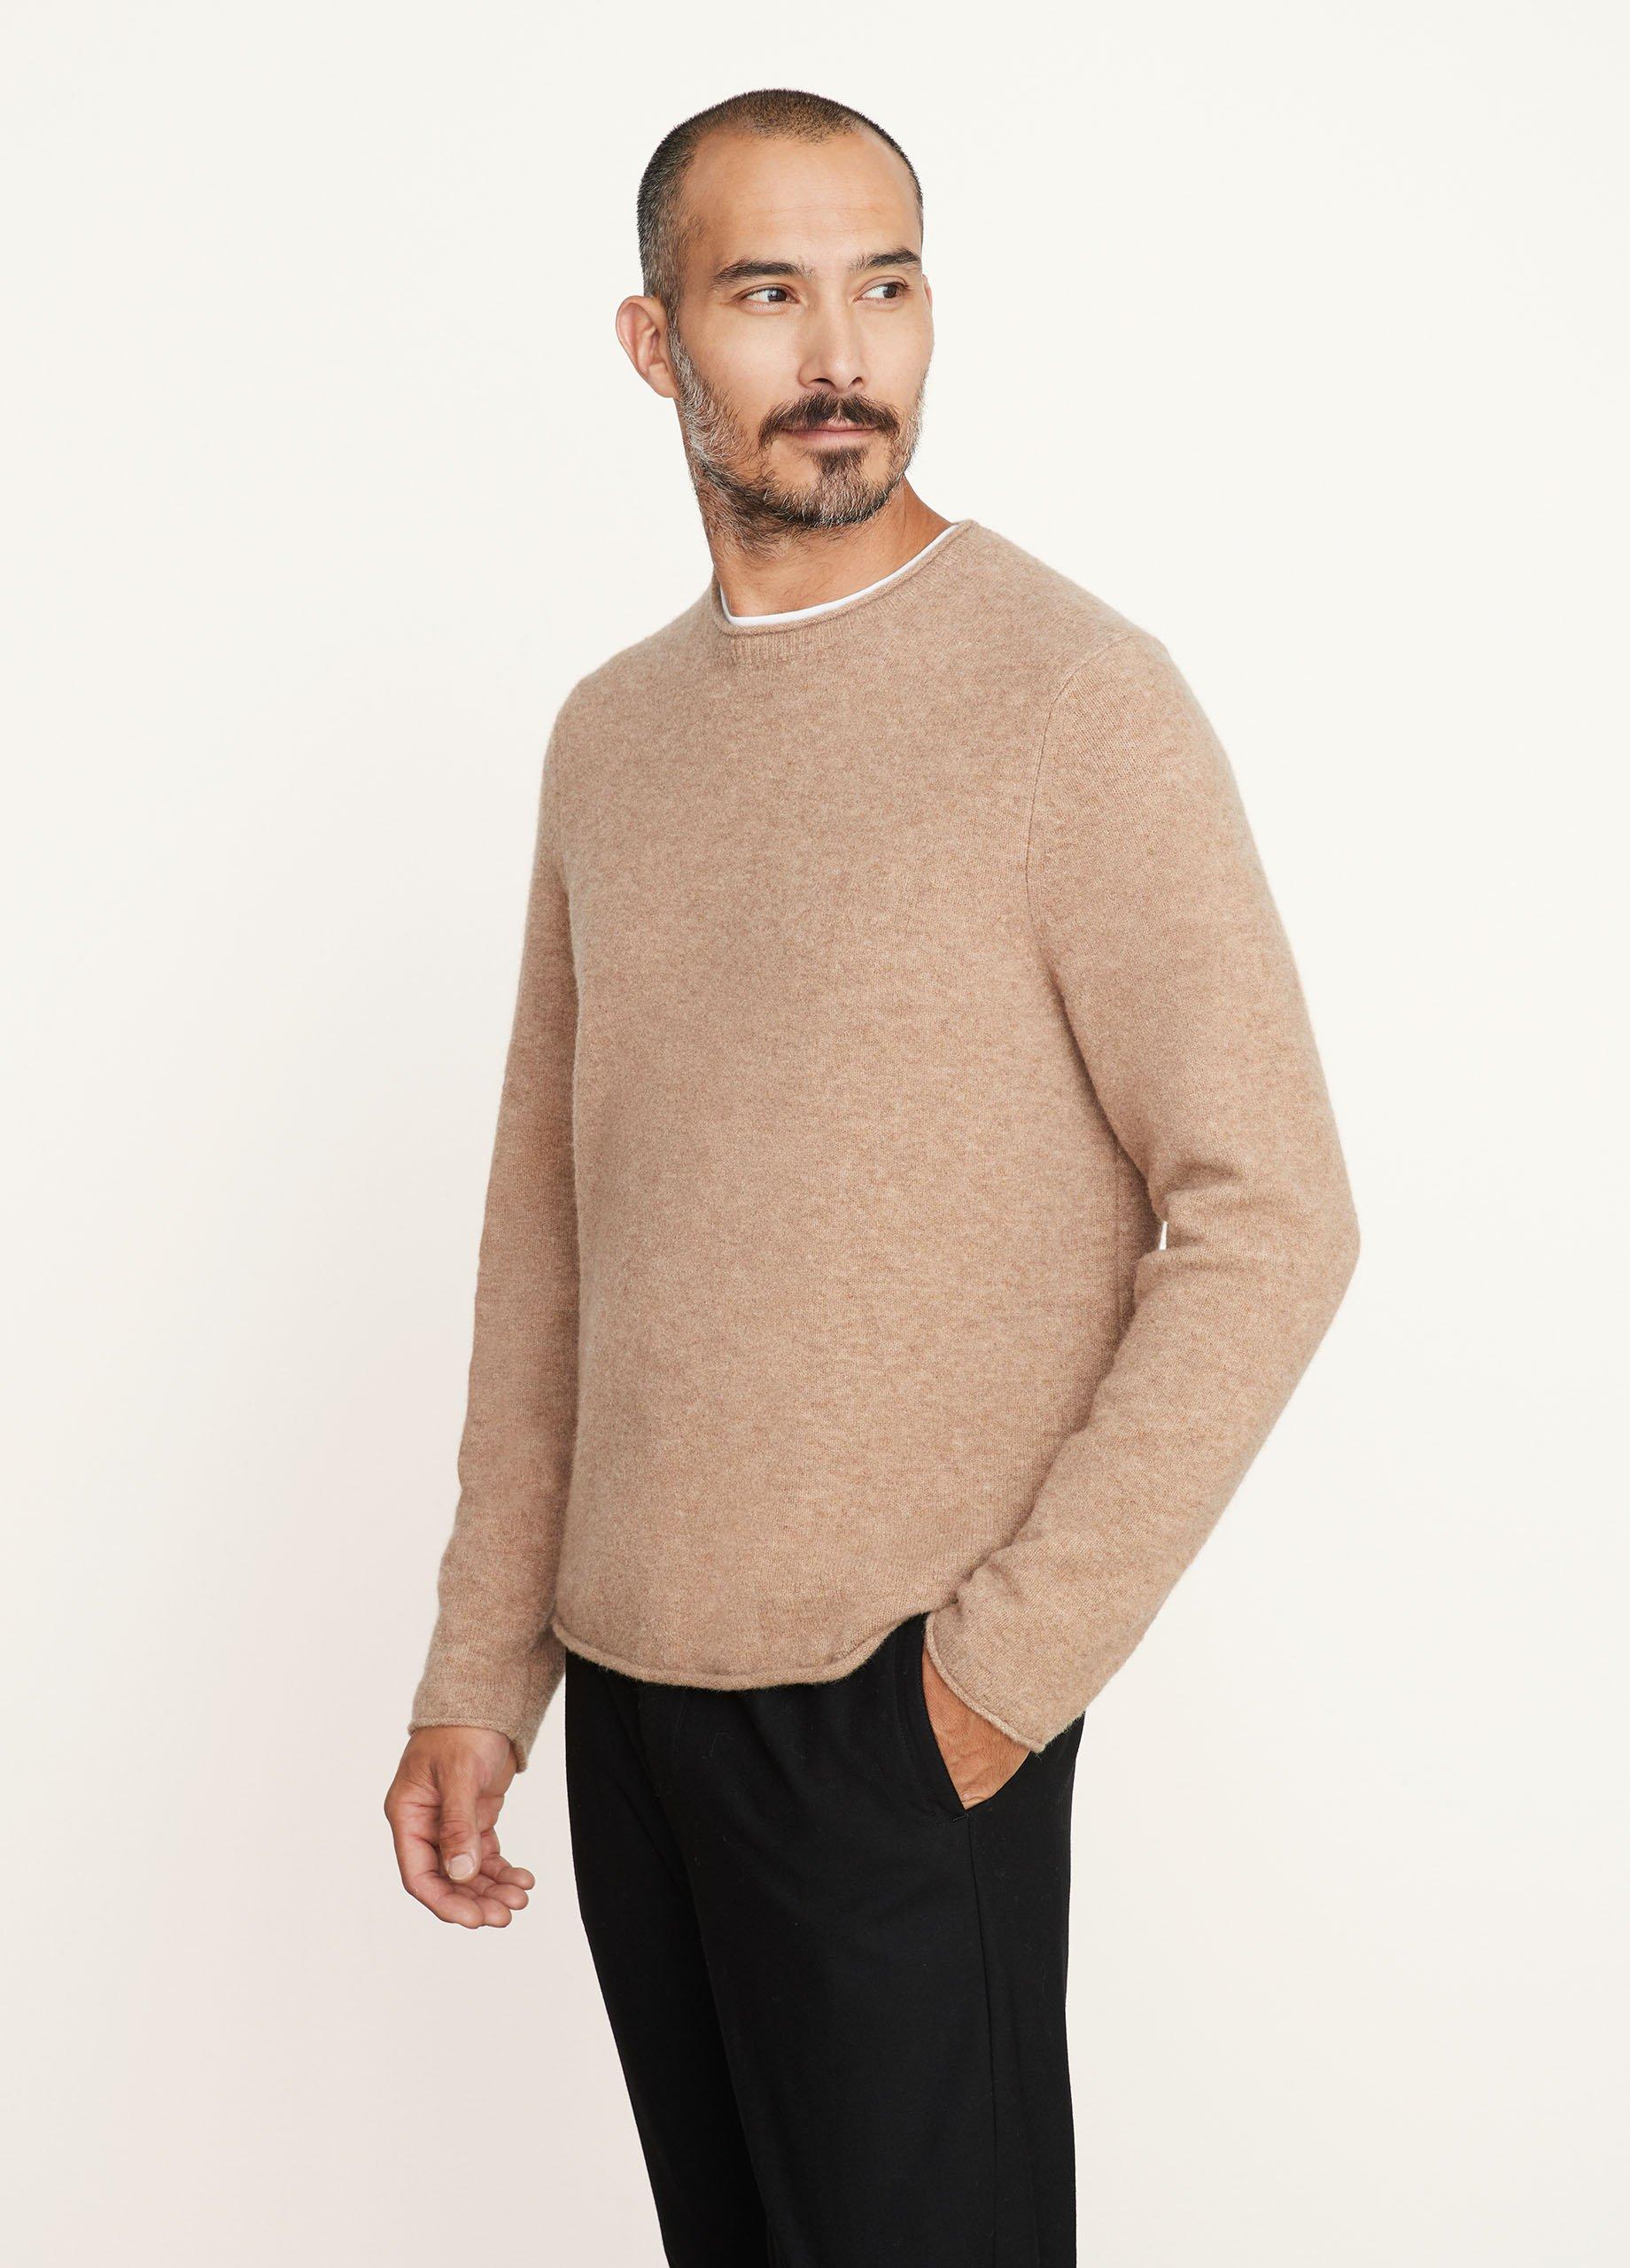 Alpaca-Blend Long Sleeve Crew Neck Sweater in Vince Products Men